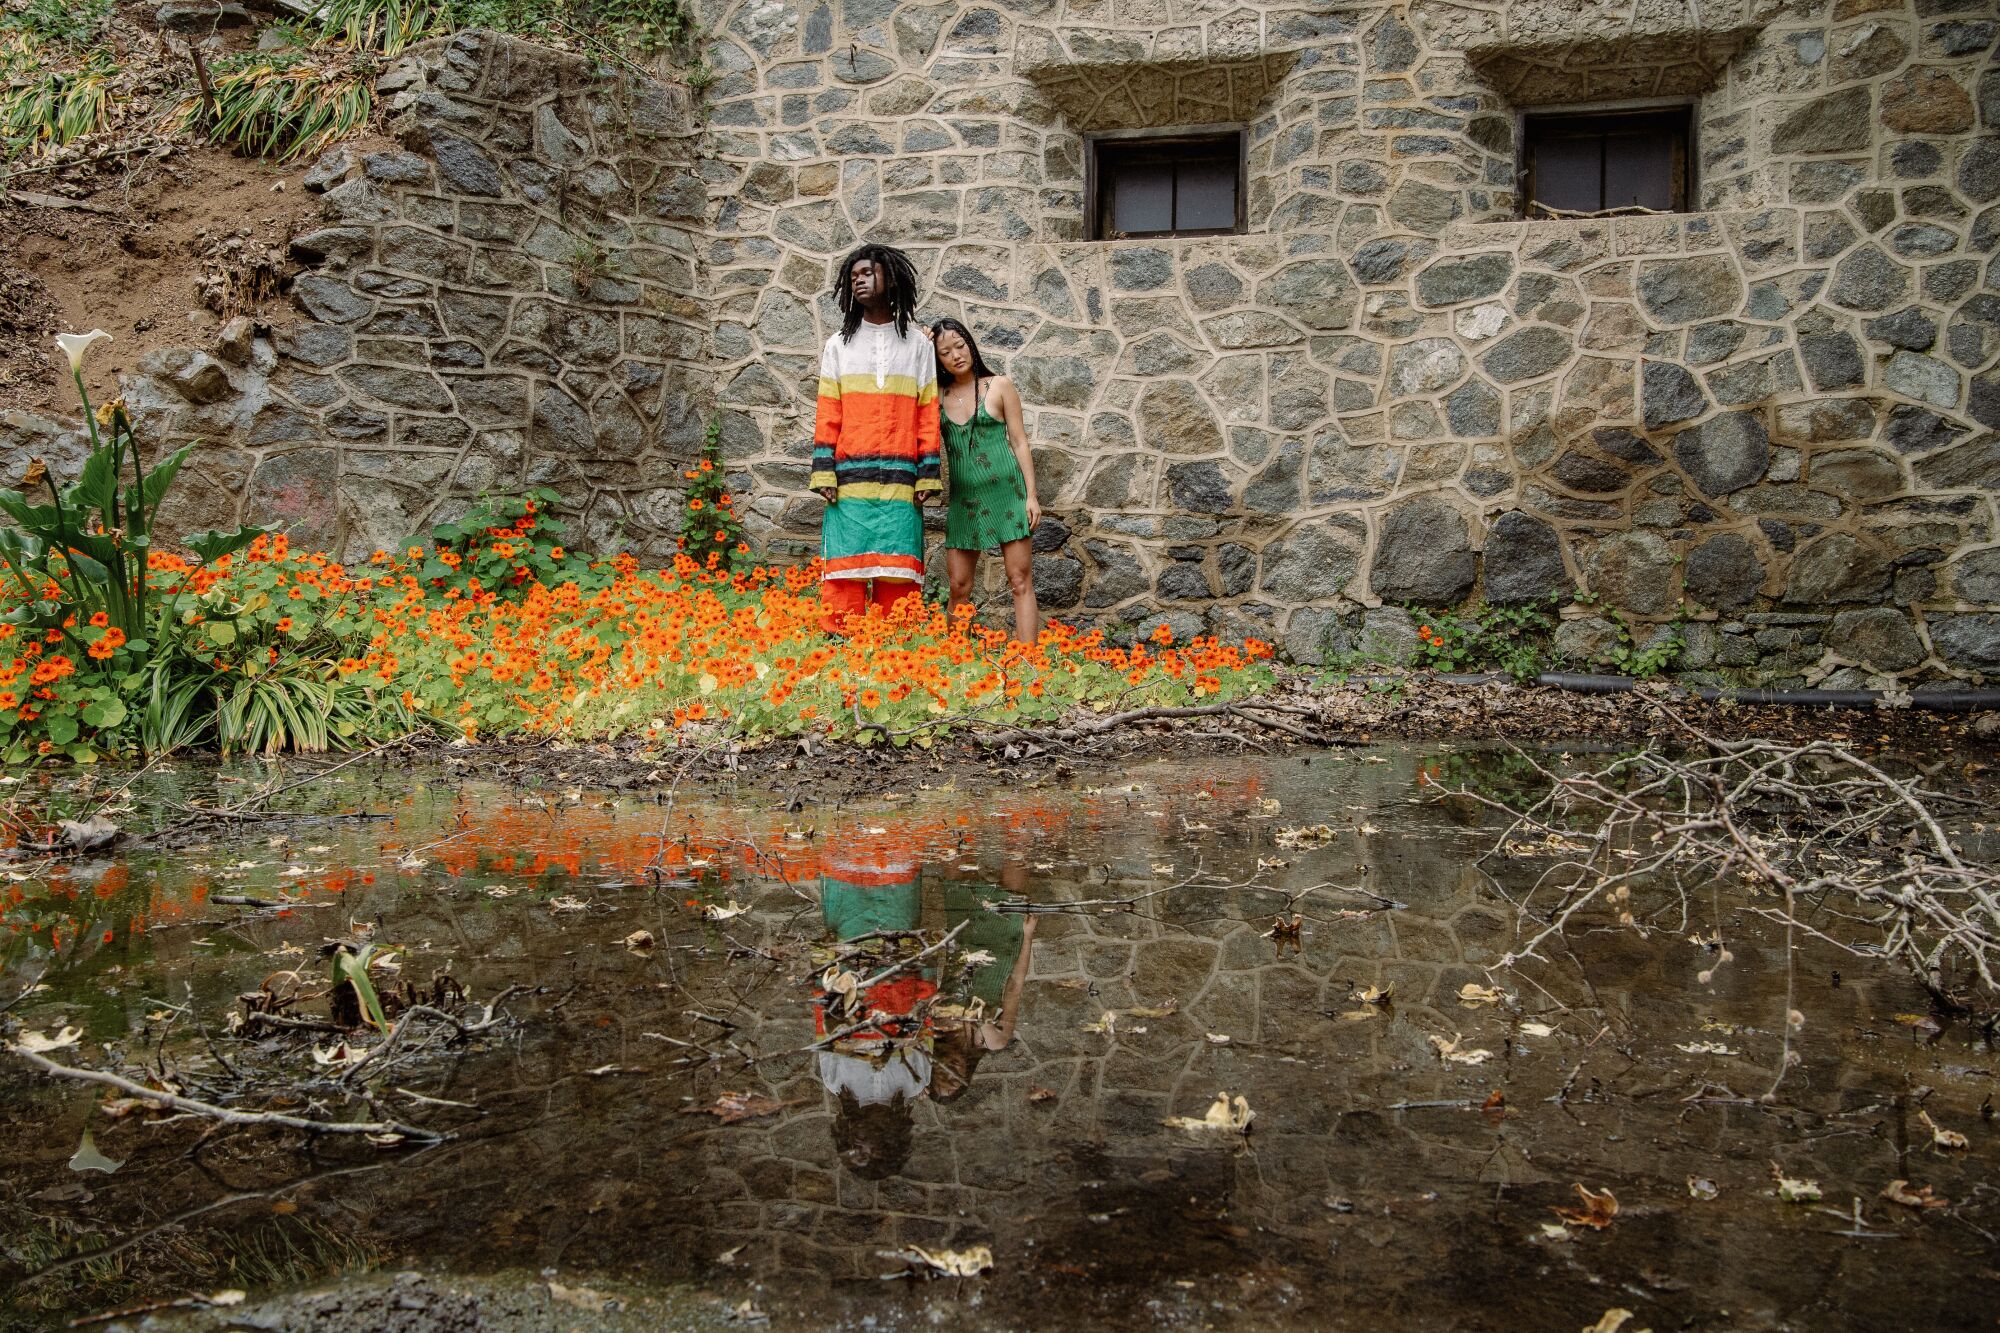 models pose in front of stone structure among orange flowers with swamp in front of them